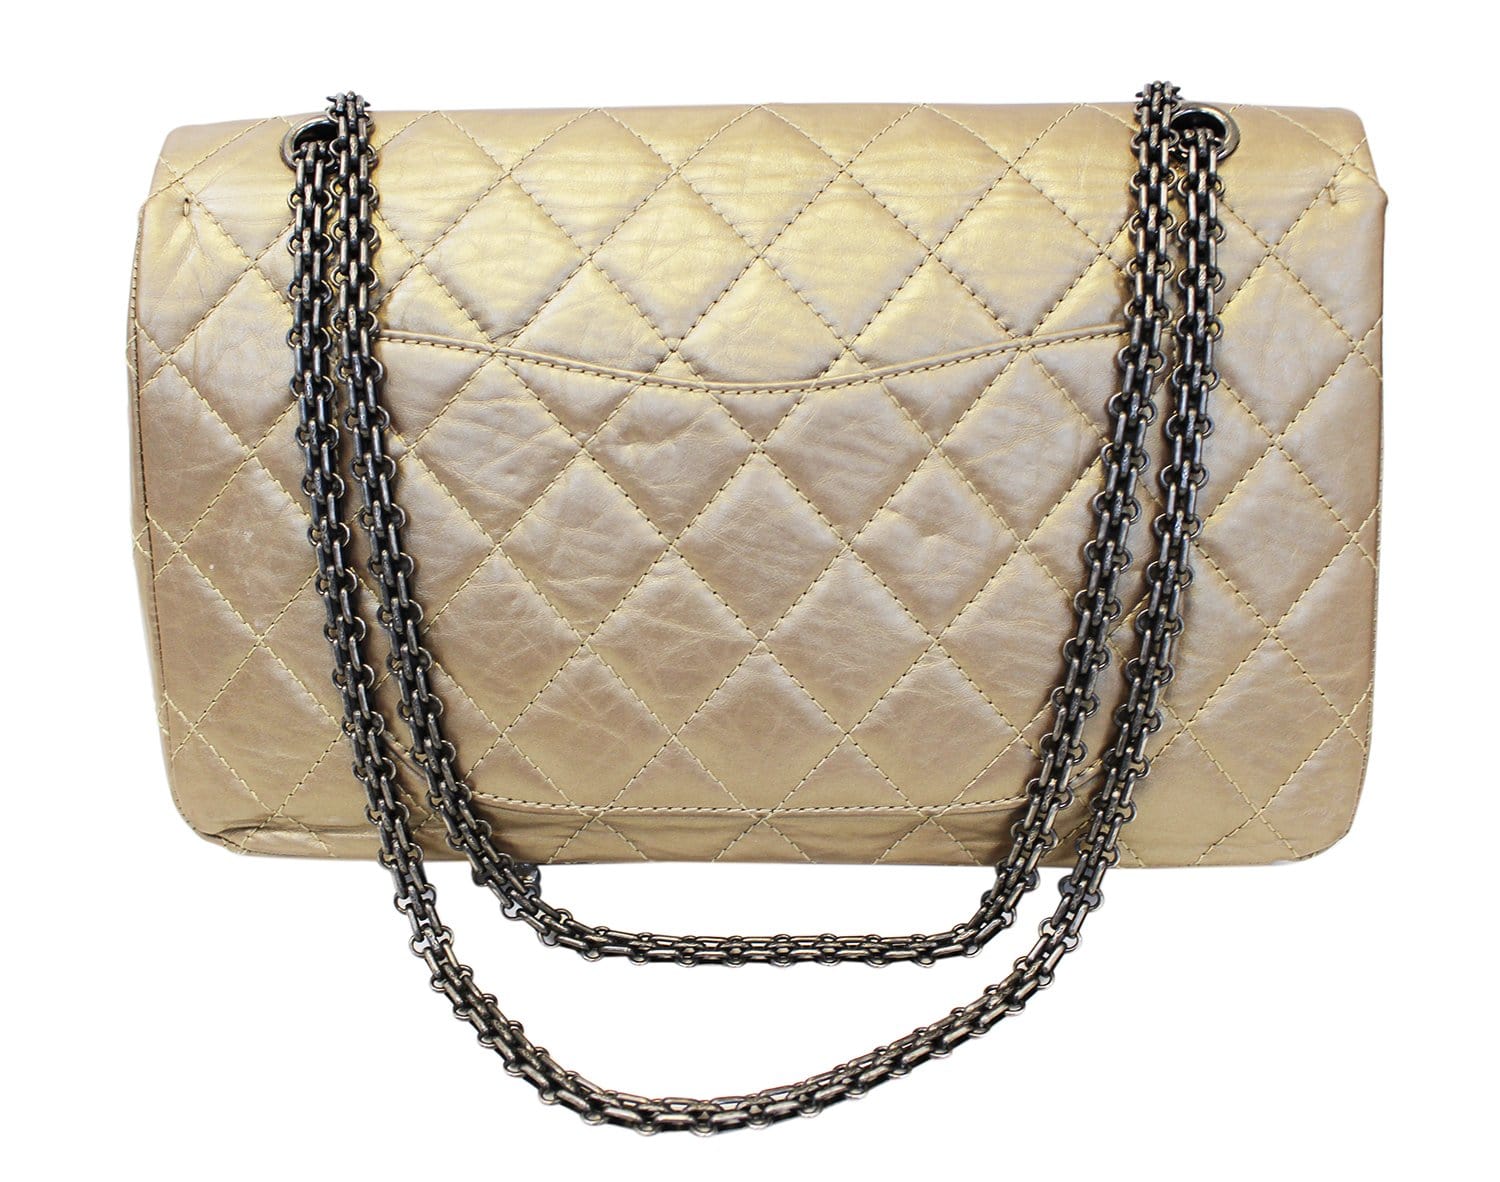 Chanel Brown Quilted Suede Reissue 2.55 Classic 225 Flap Bag Chanel